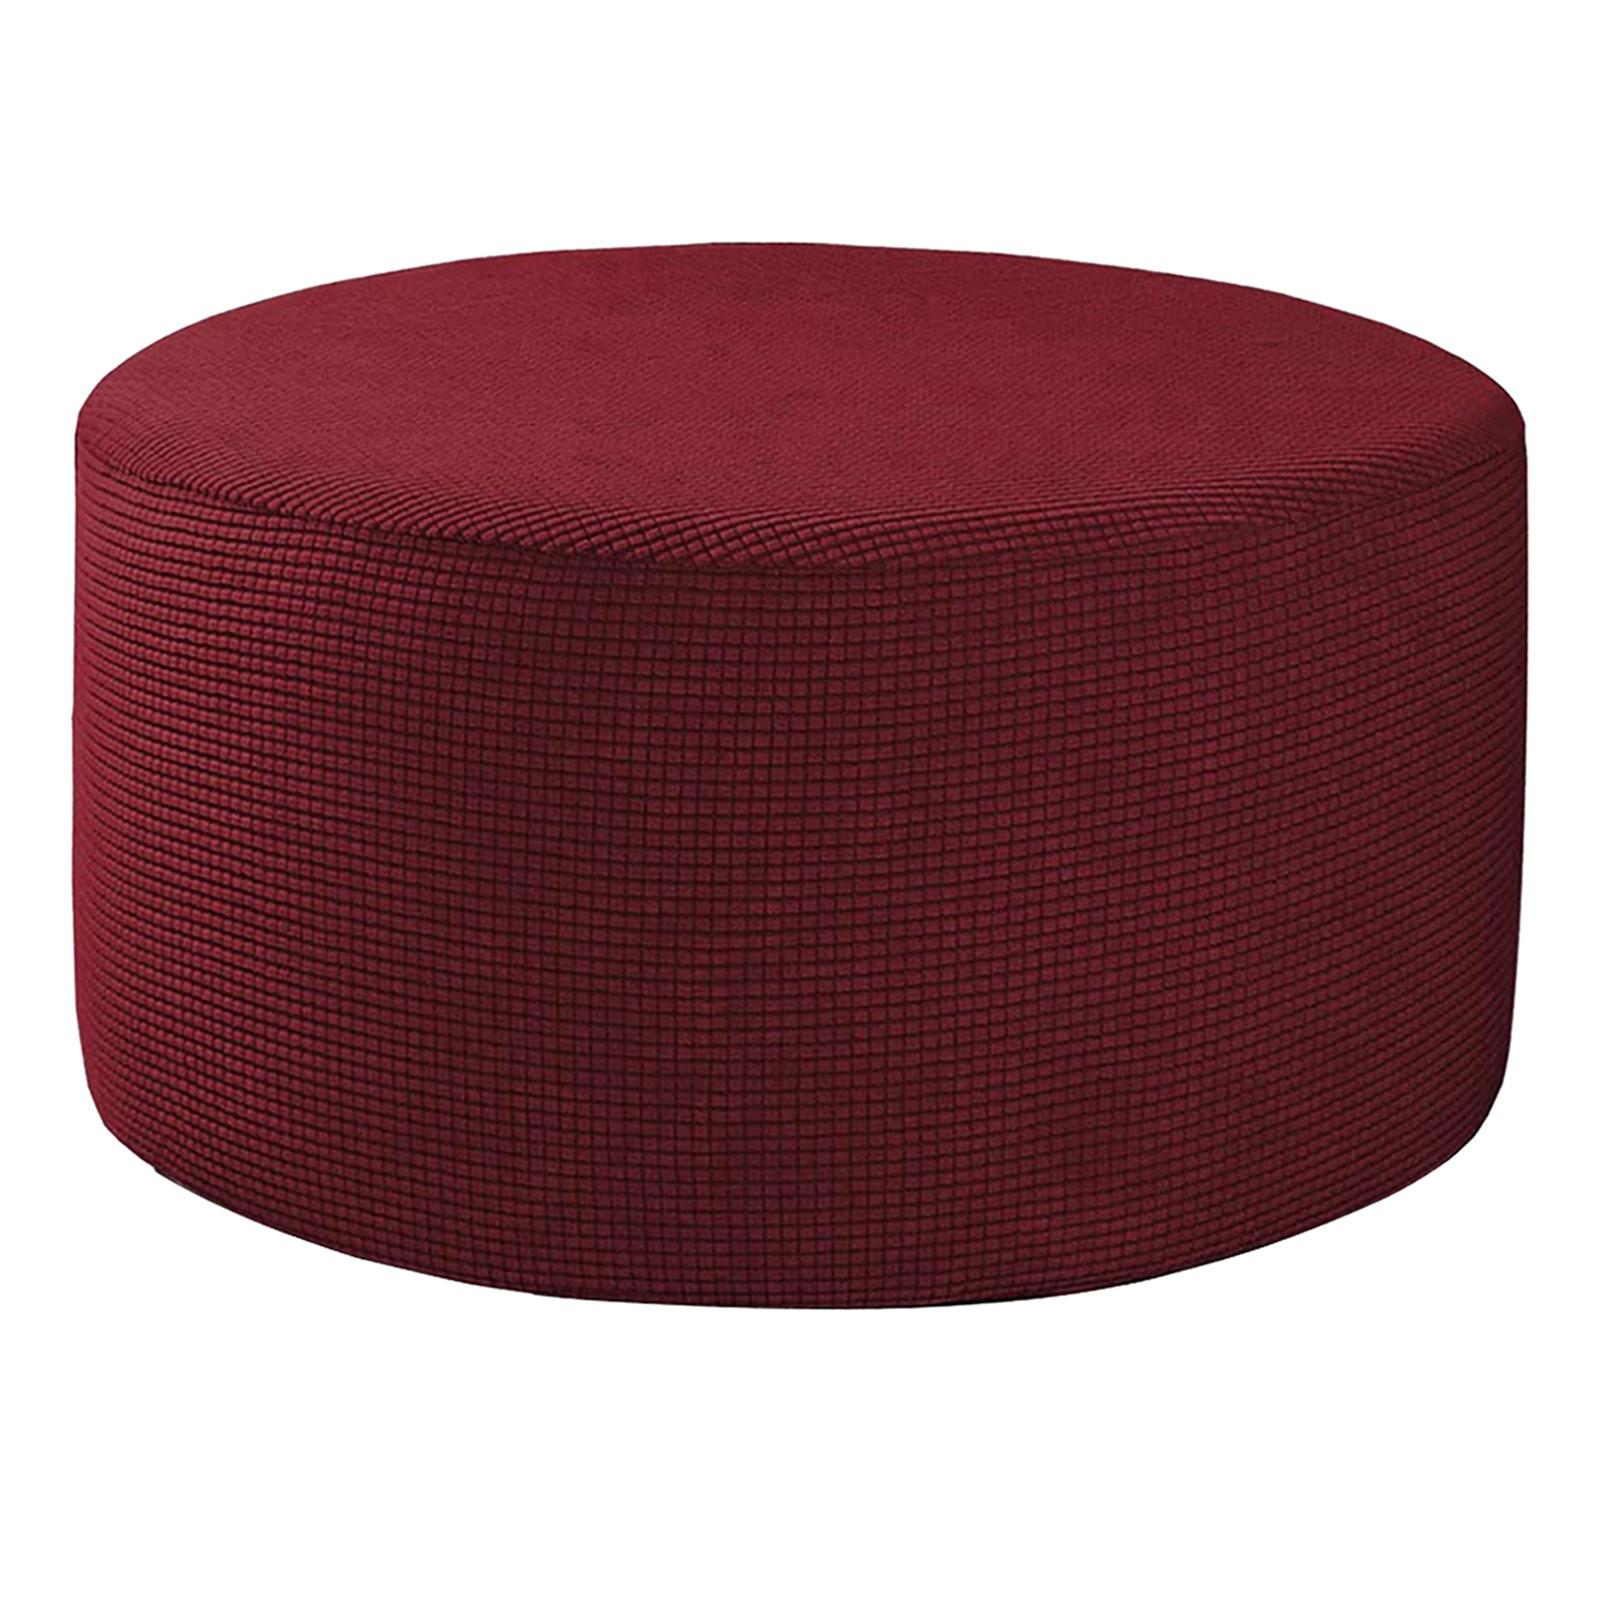 Ottoman Slipcovers Round Ottoman Footstool Cover Removable Red - image 5 of 6